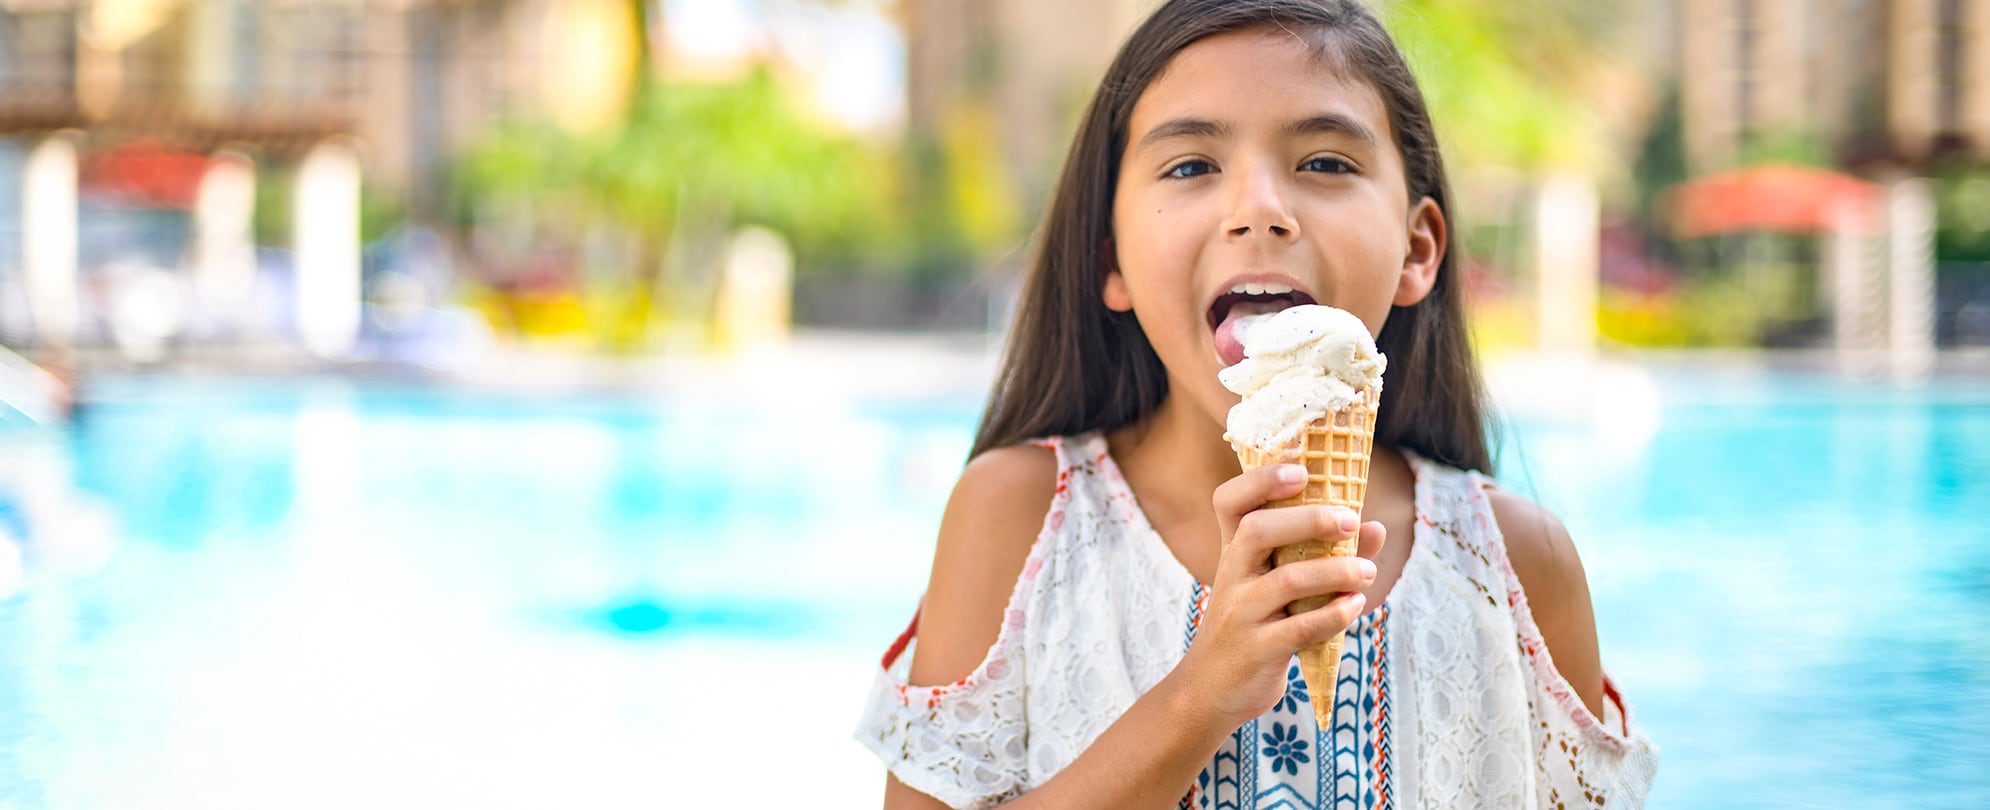 A young girl licks a vanilla ice cream waffle cone by the pool at a Club Wyndham resort